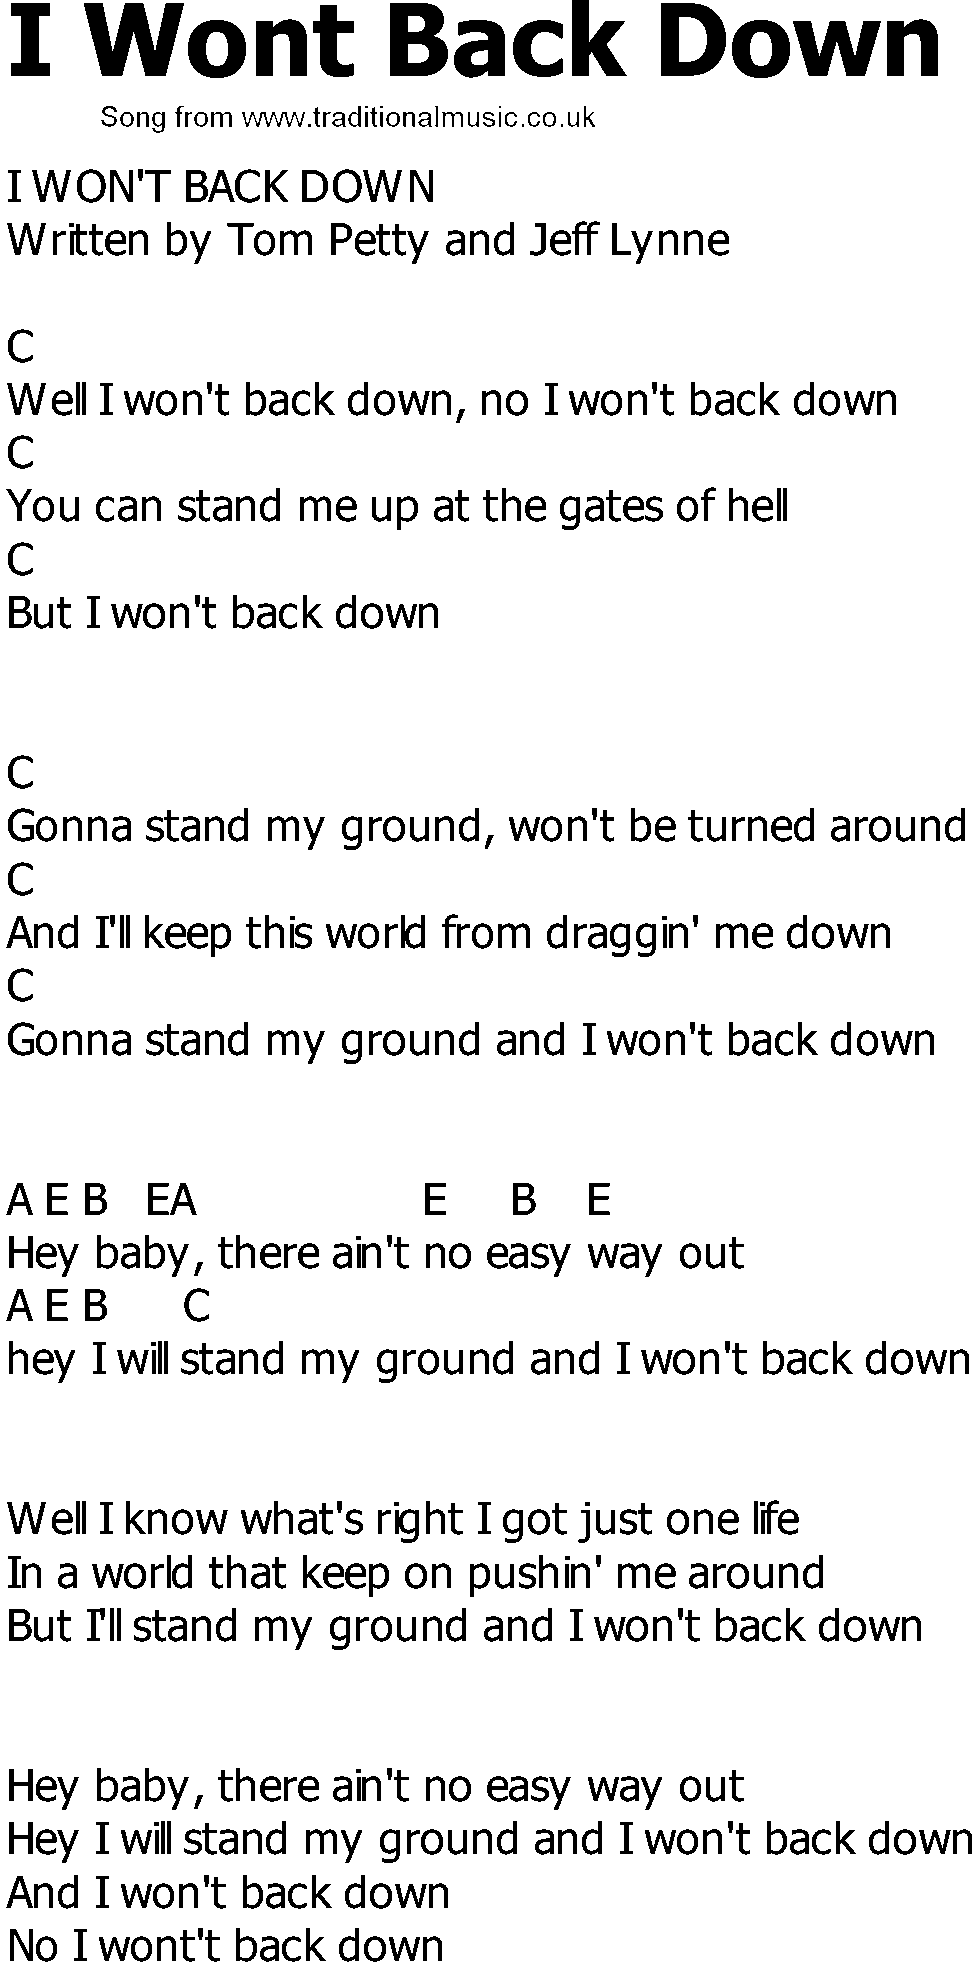 Old Country song lyrics with chords - I Wont Back Down